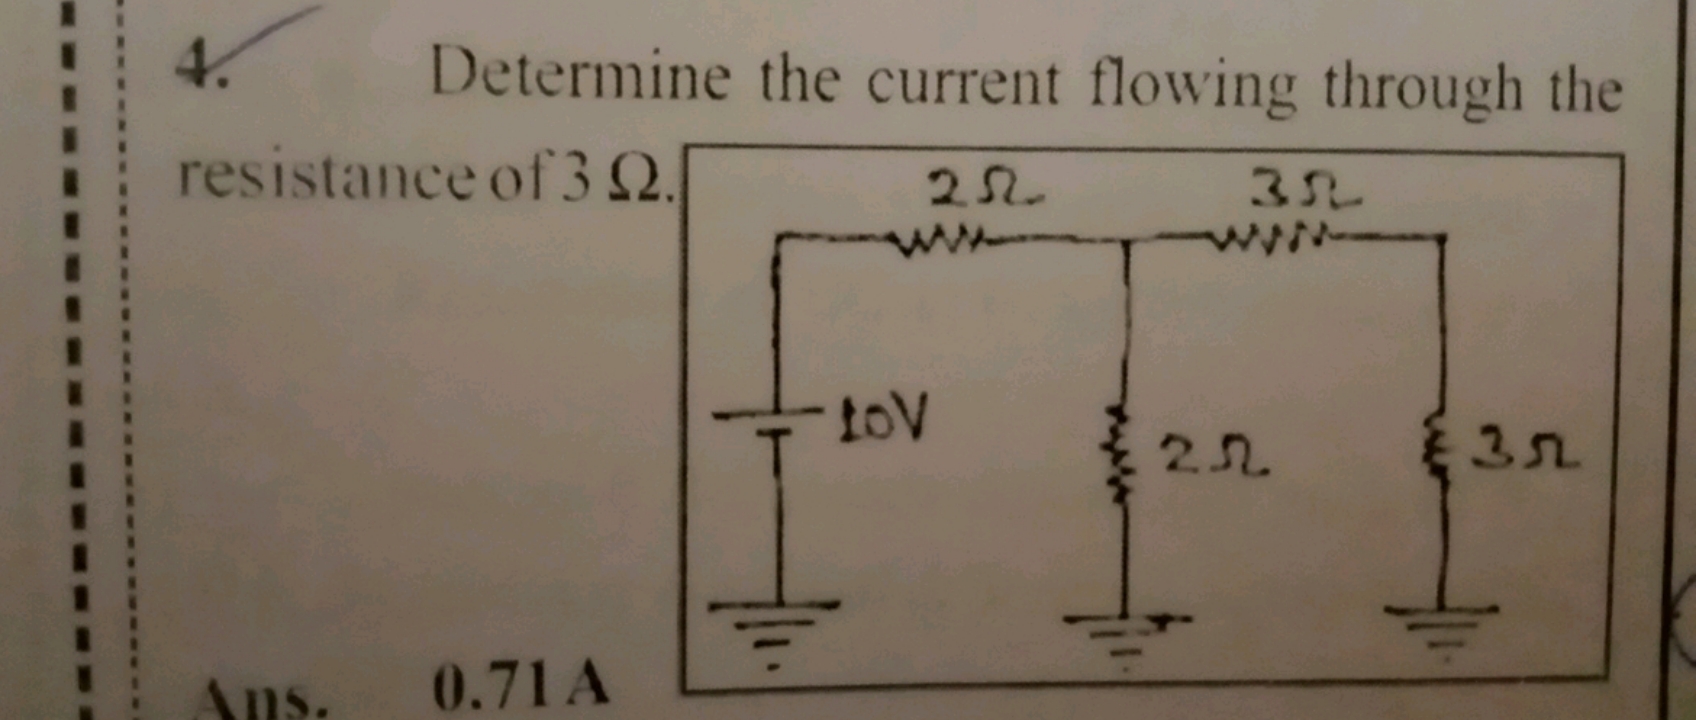 4. Determine the current flowing through the
